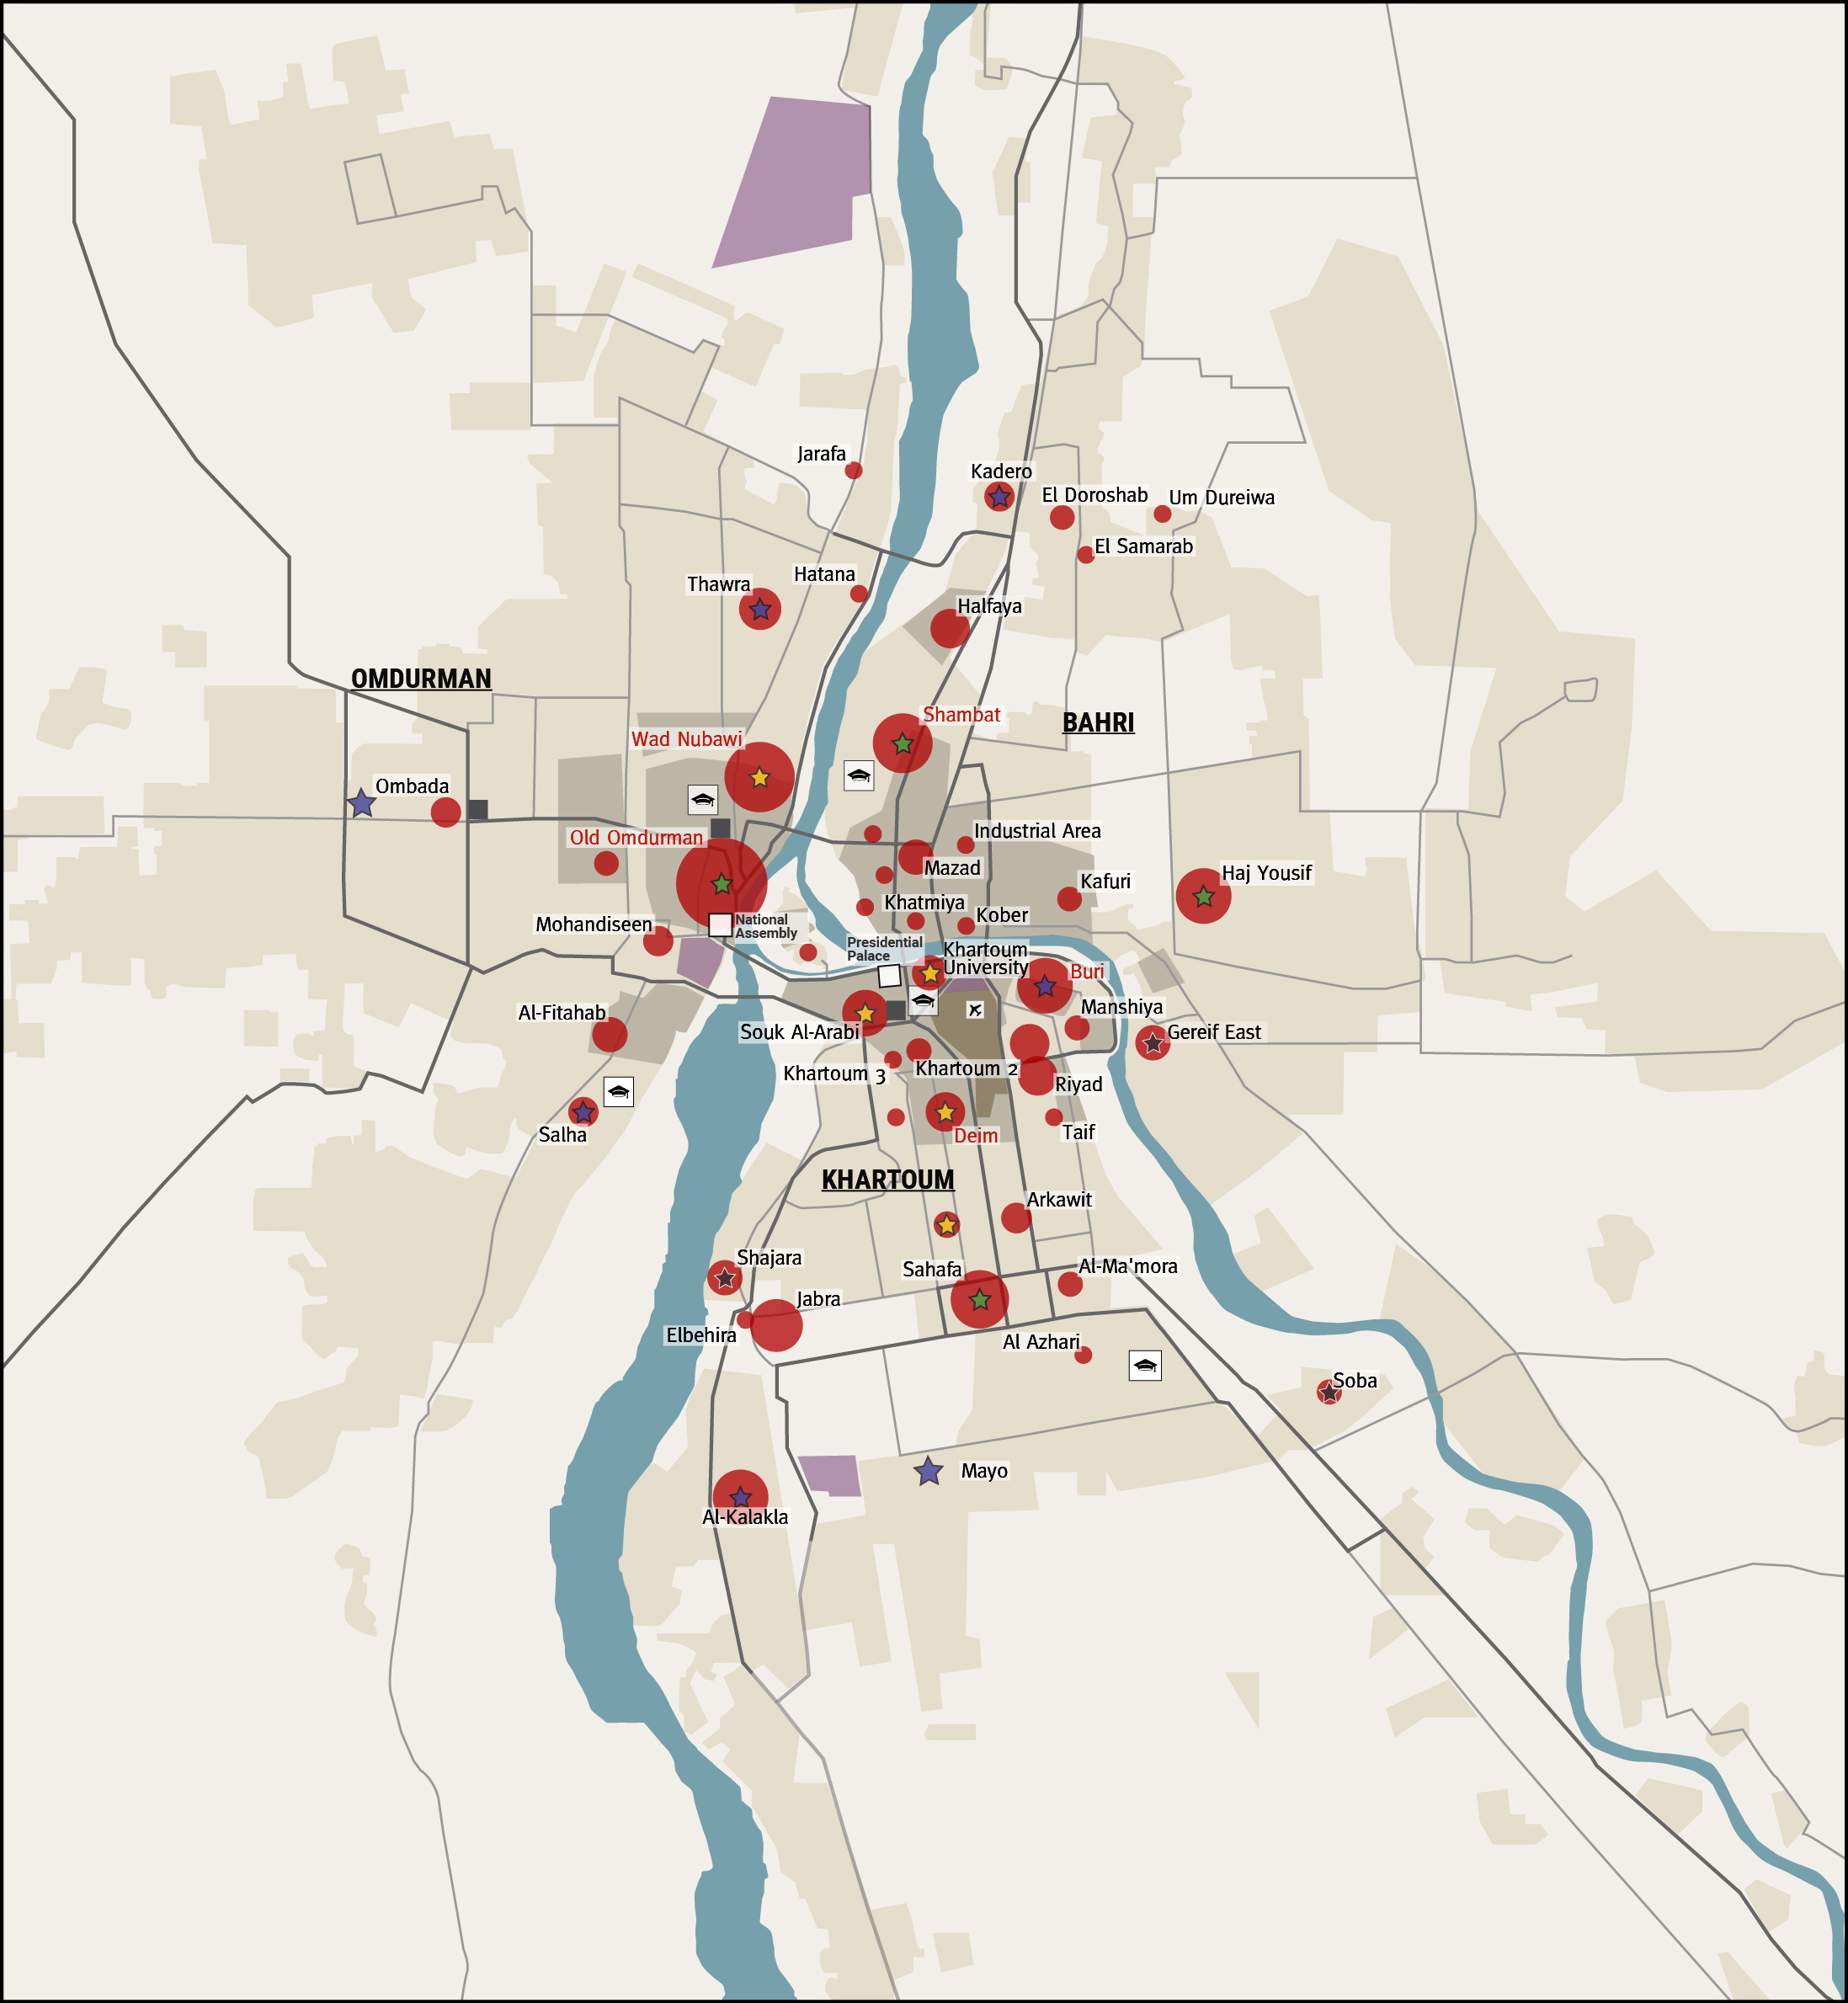 Mapping the 2019 Sudan Protests